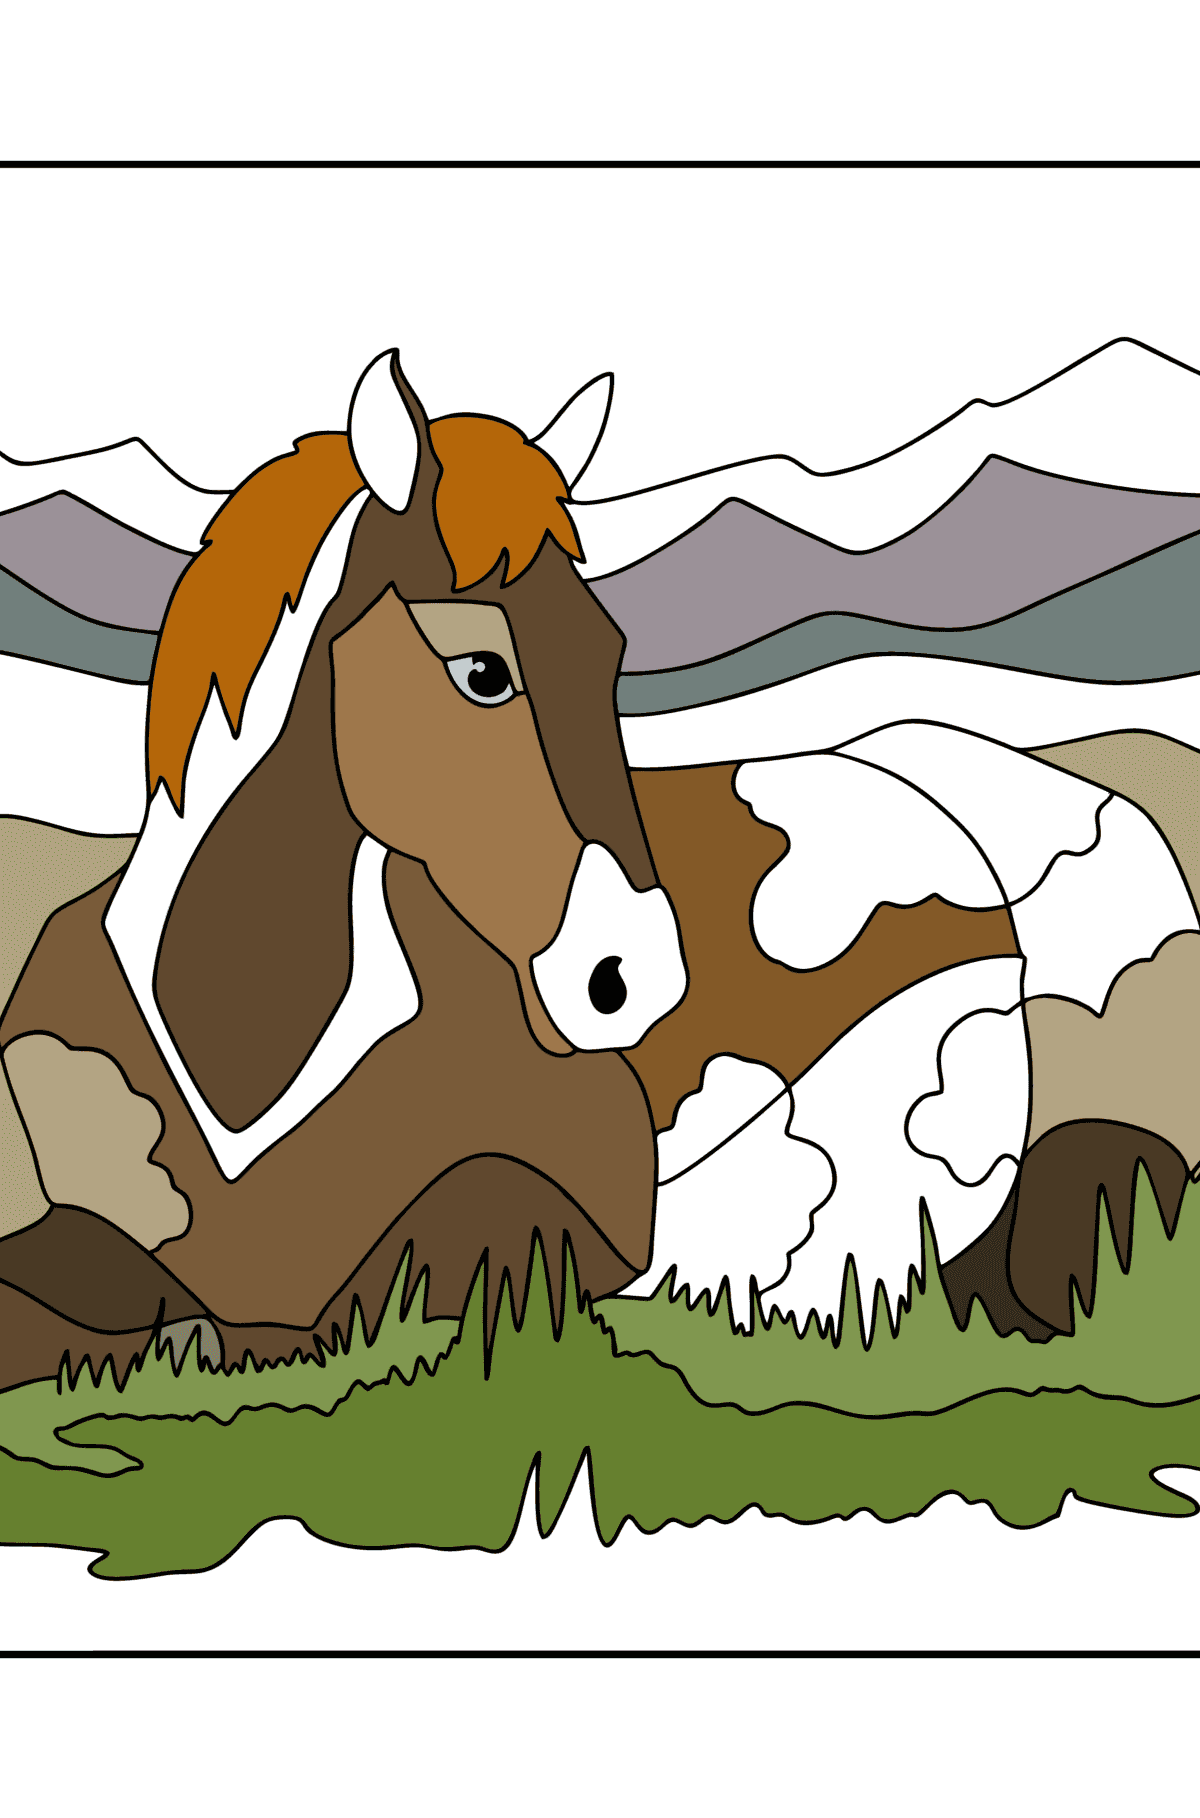 Sleeping horse сoloring page - Coloring Pages for Kids